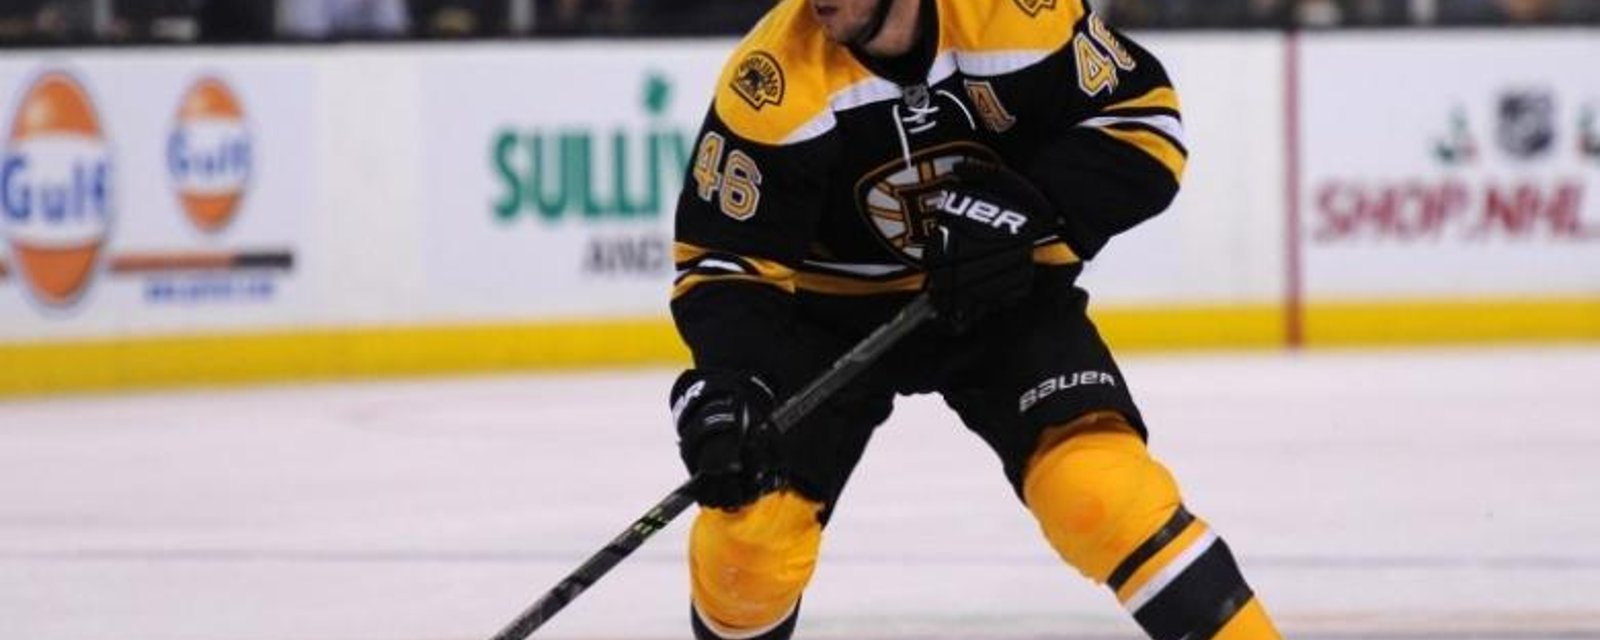 Where Is David Pastrnak Playing?